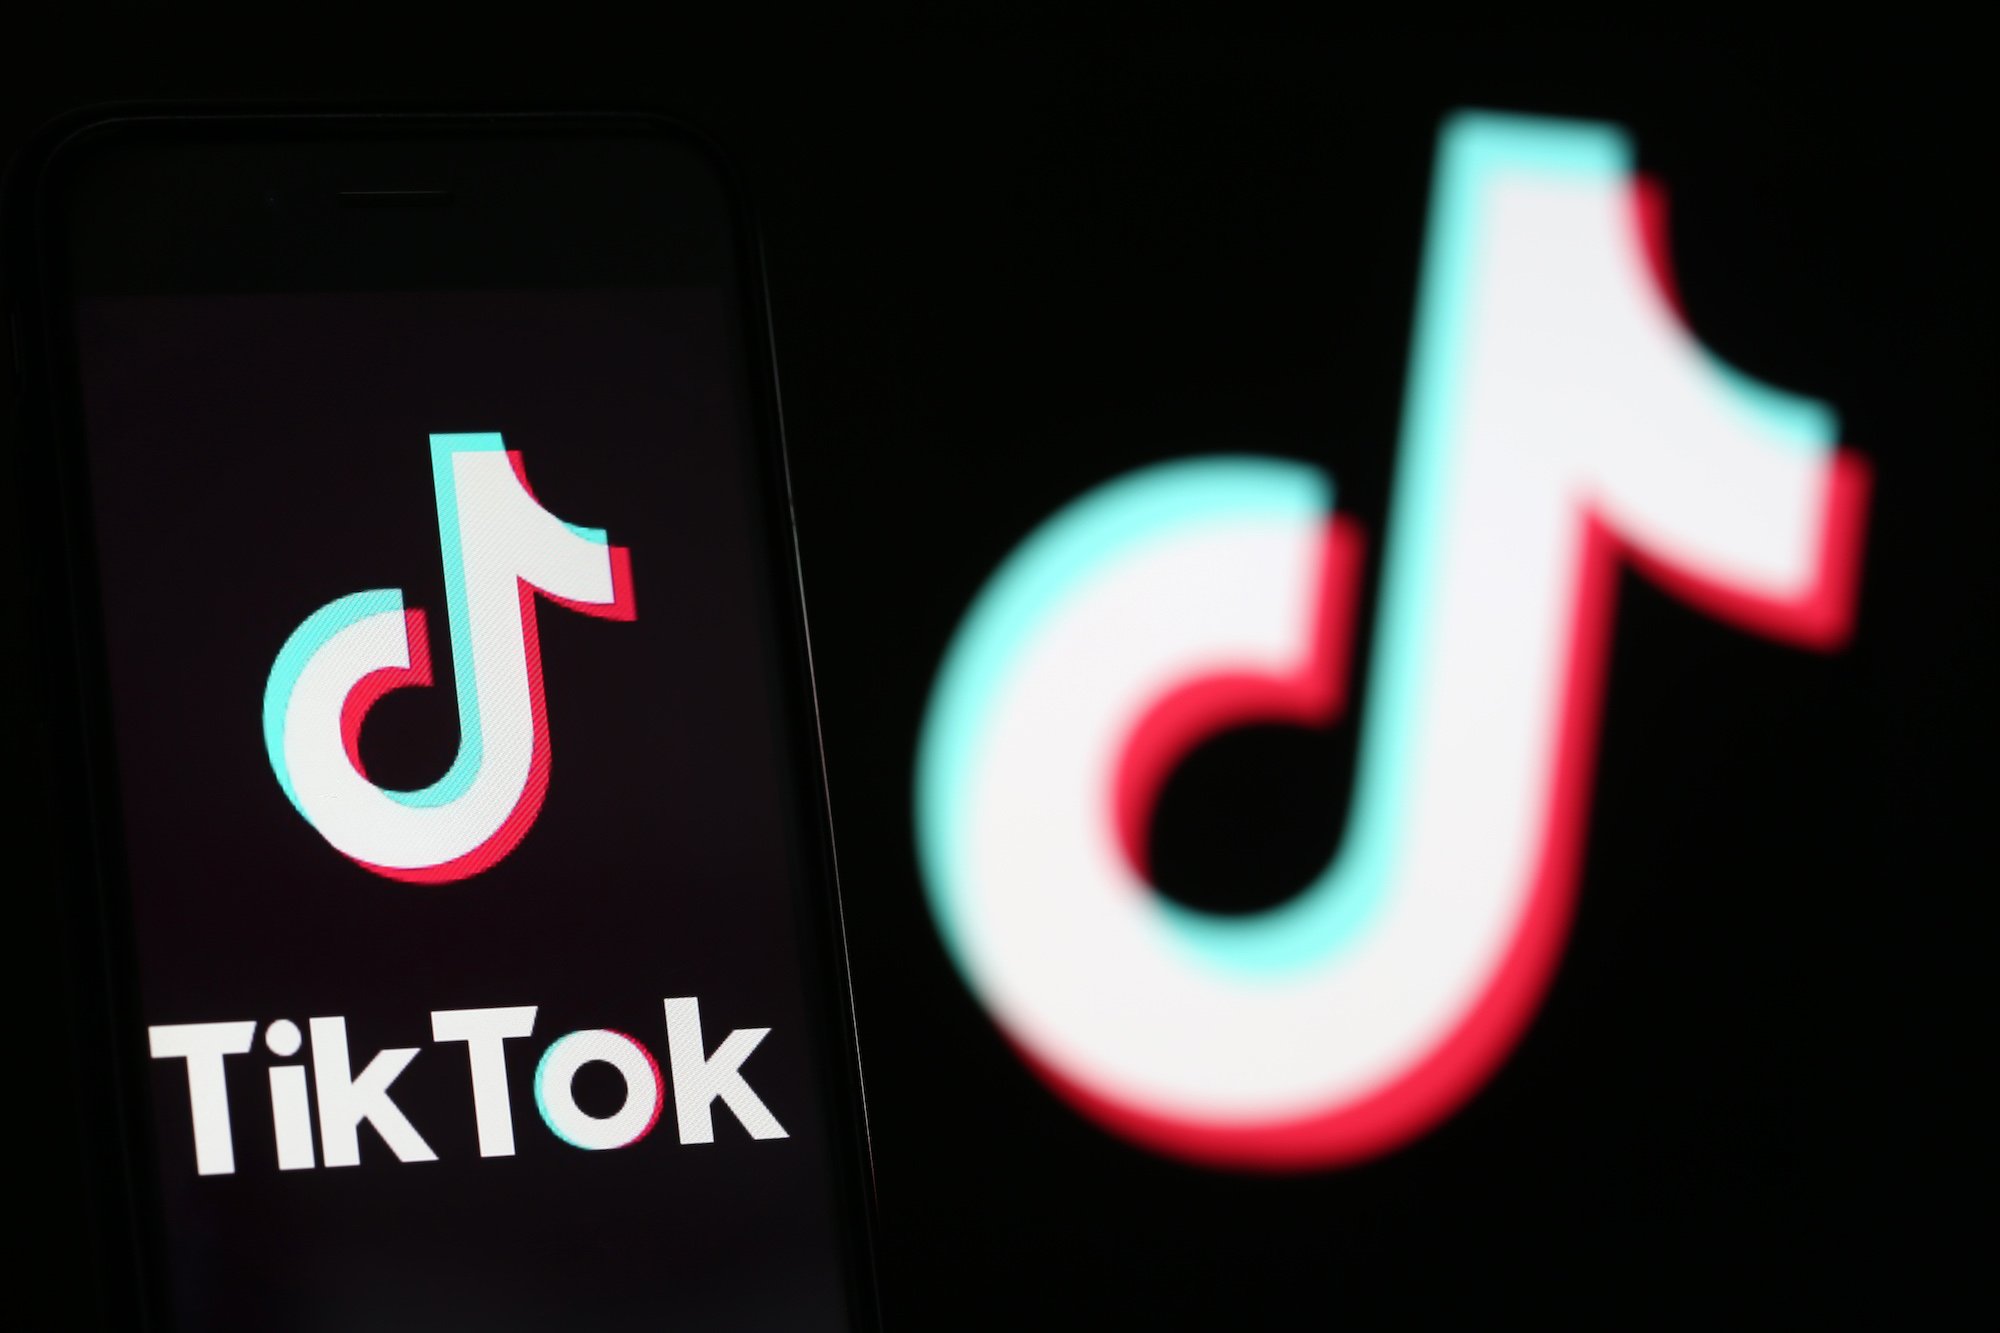 Illustration of the logo for TikTok displayed on the screen of a smartphone in front of a TV screen displaying the TikTok logo